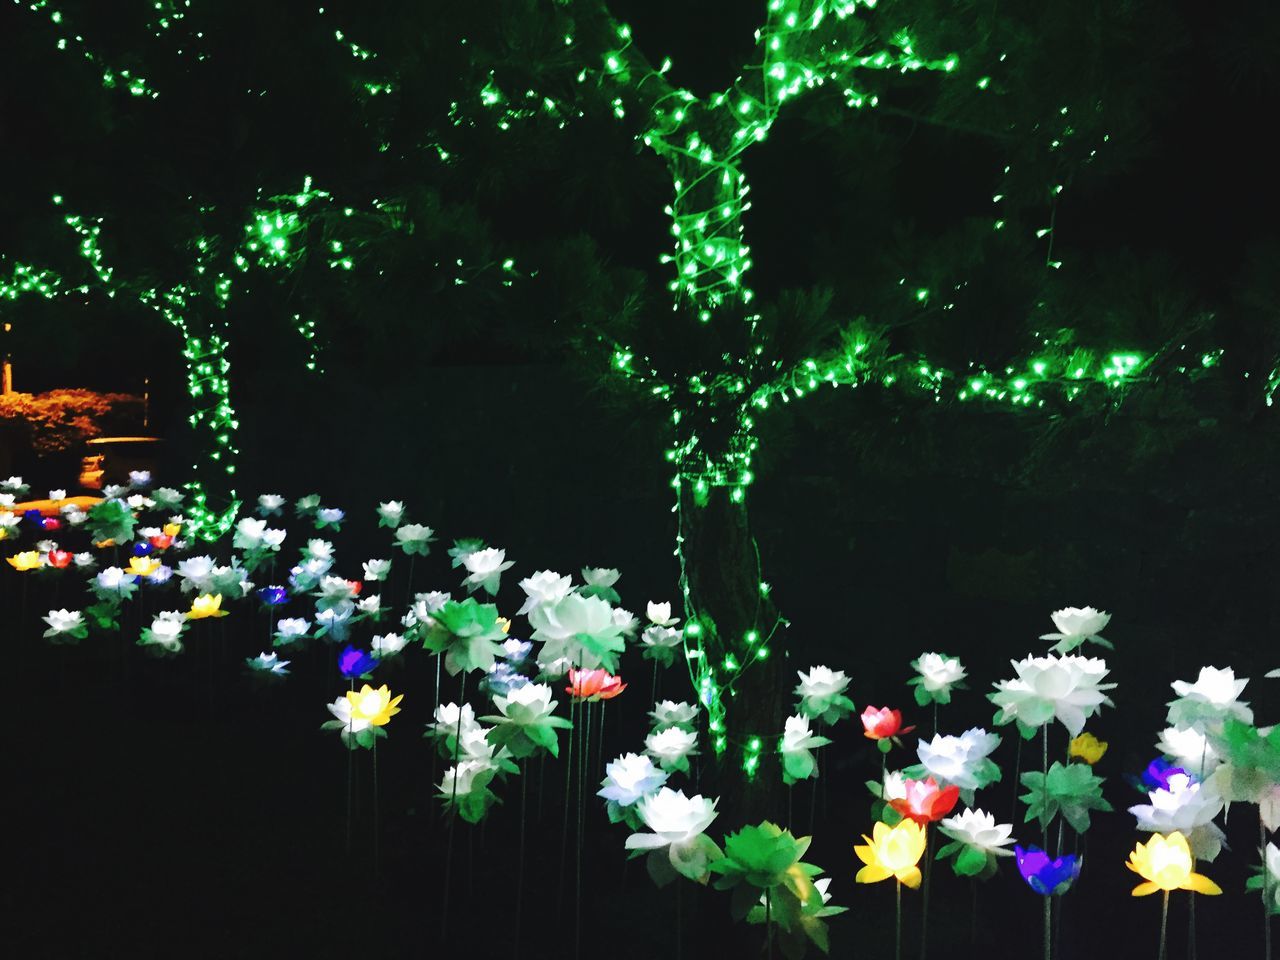 night, illuminated, flower, lighting equipment, decoration, growth, celebration, fragility, park - man made space, freshness, plant, tree, beauty in nature, no people, blooming, purple, outdoors, nature, multi colored, white color